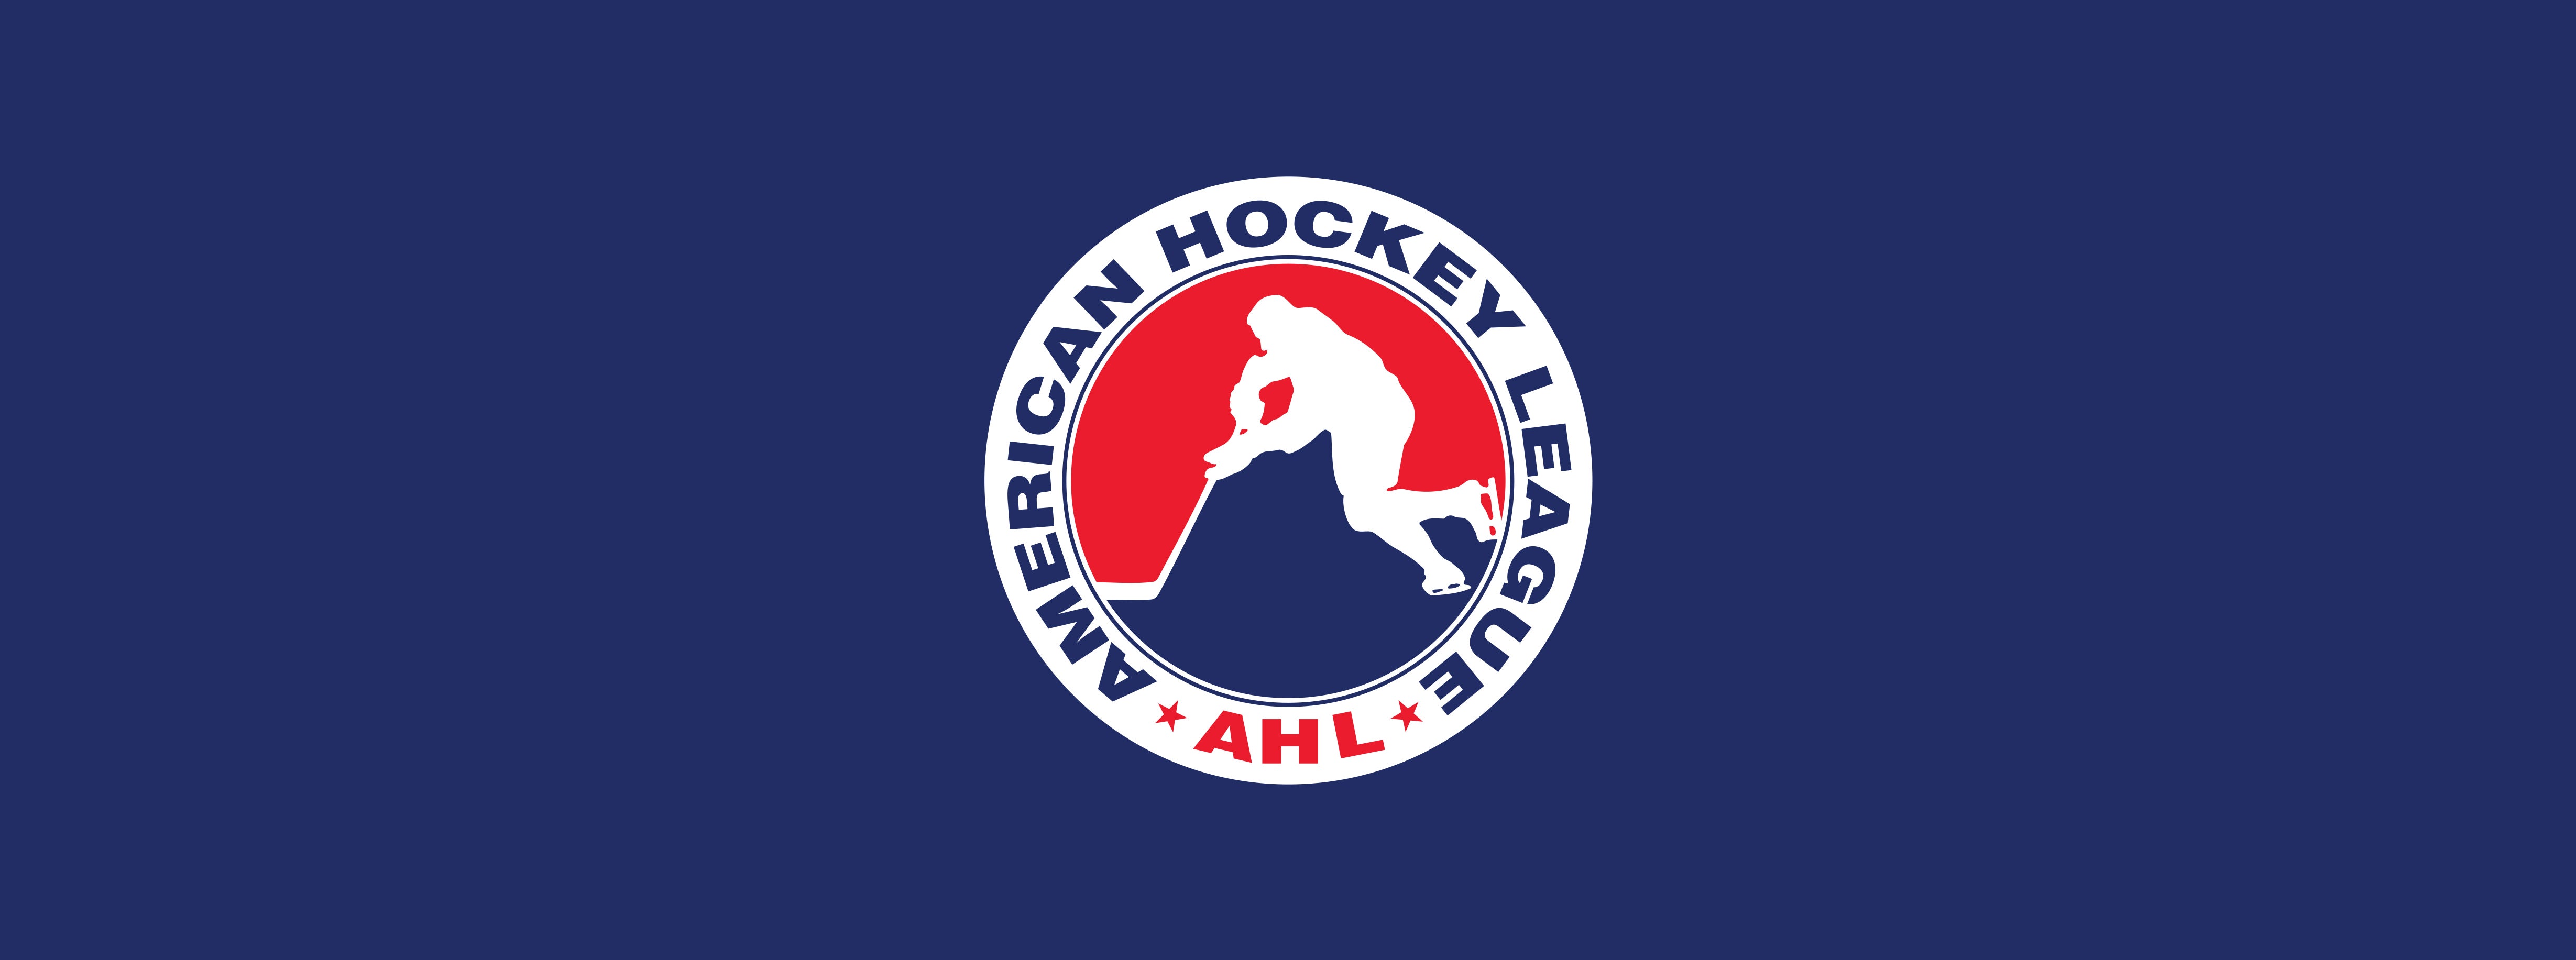 AHL Announces Changes, Islanders Home Games Affected